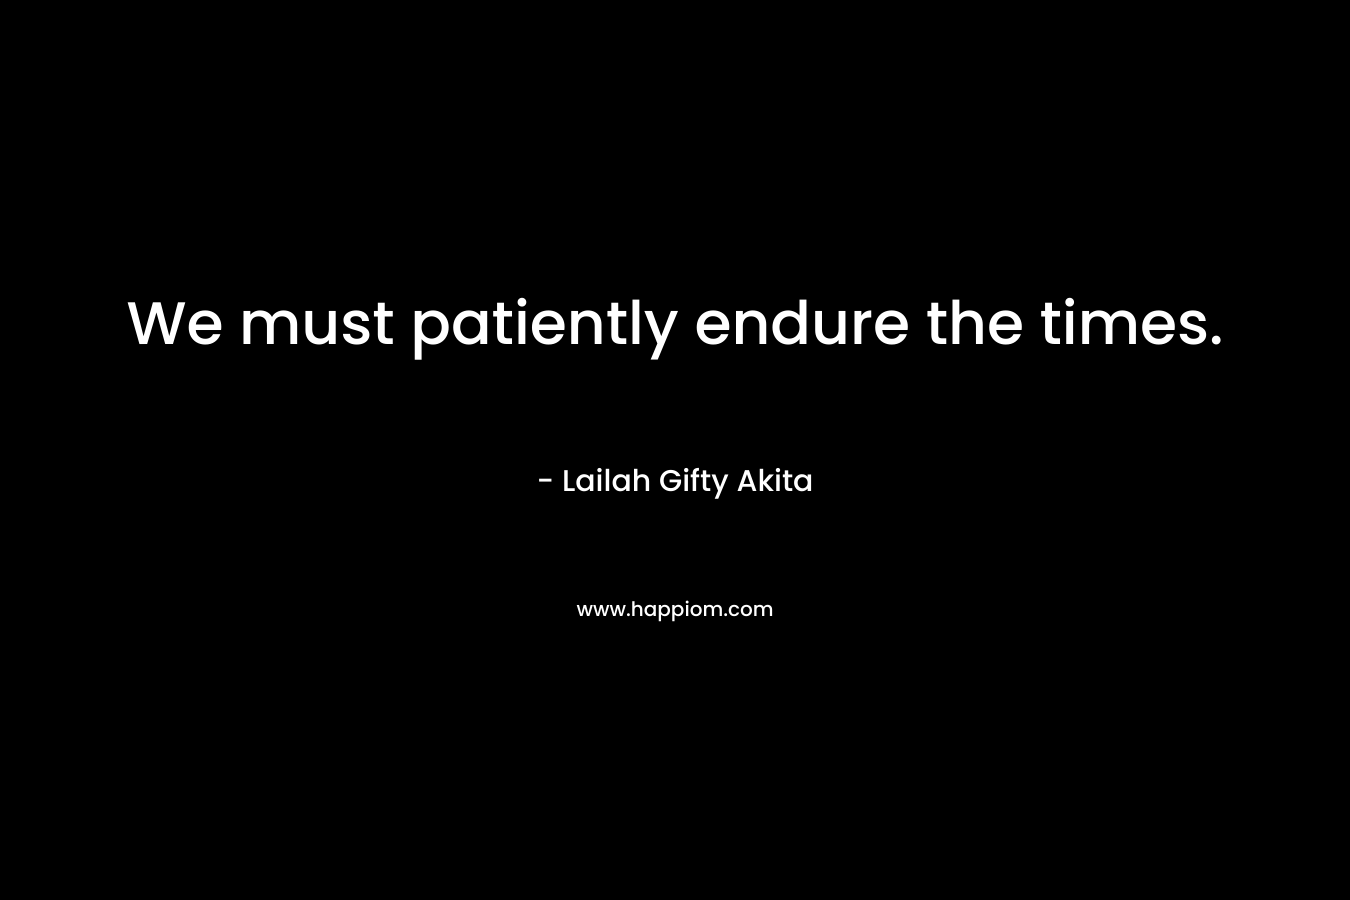 We must patiently endure the times.